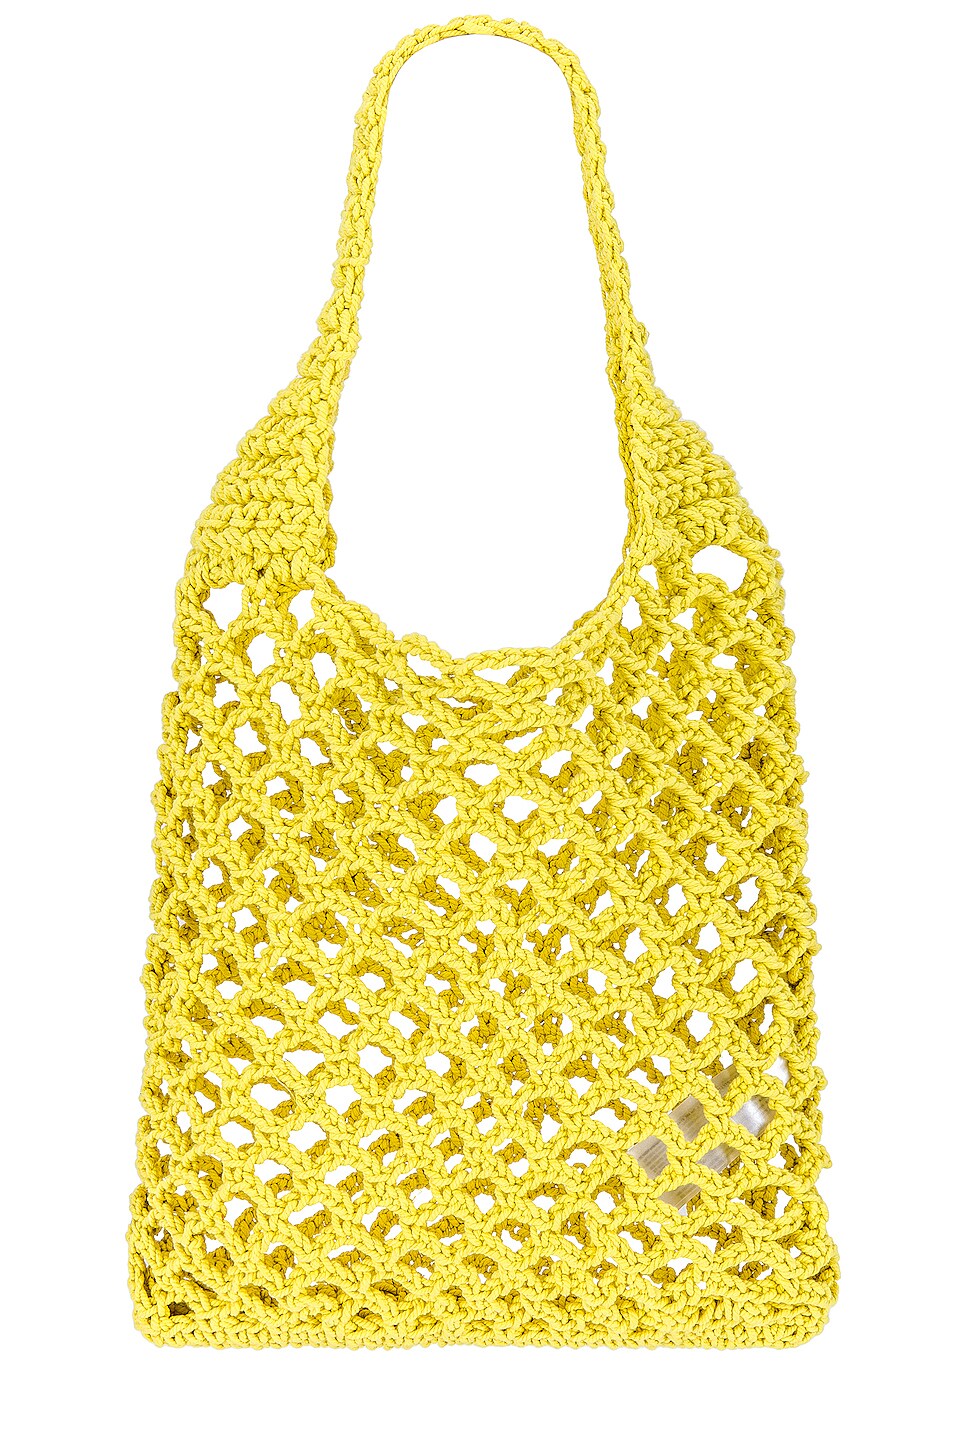 Seafolly Plaited Rope Tote in Celery